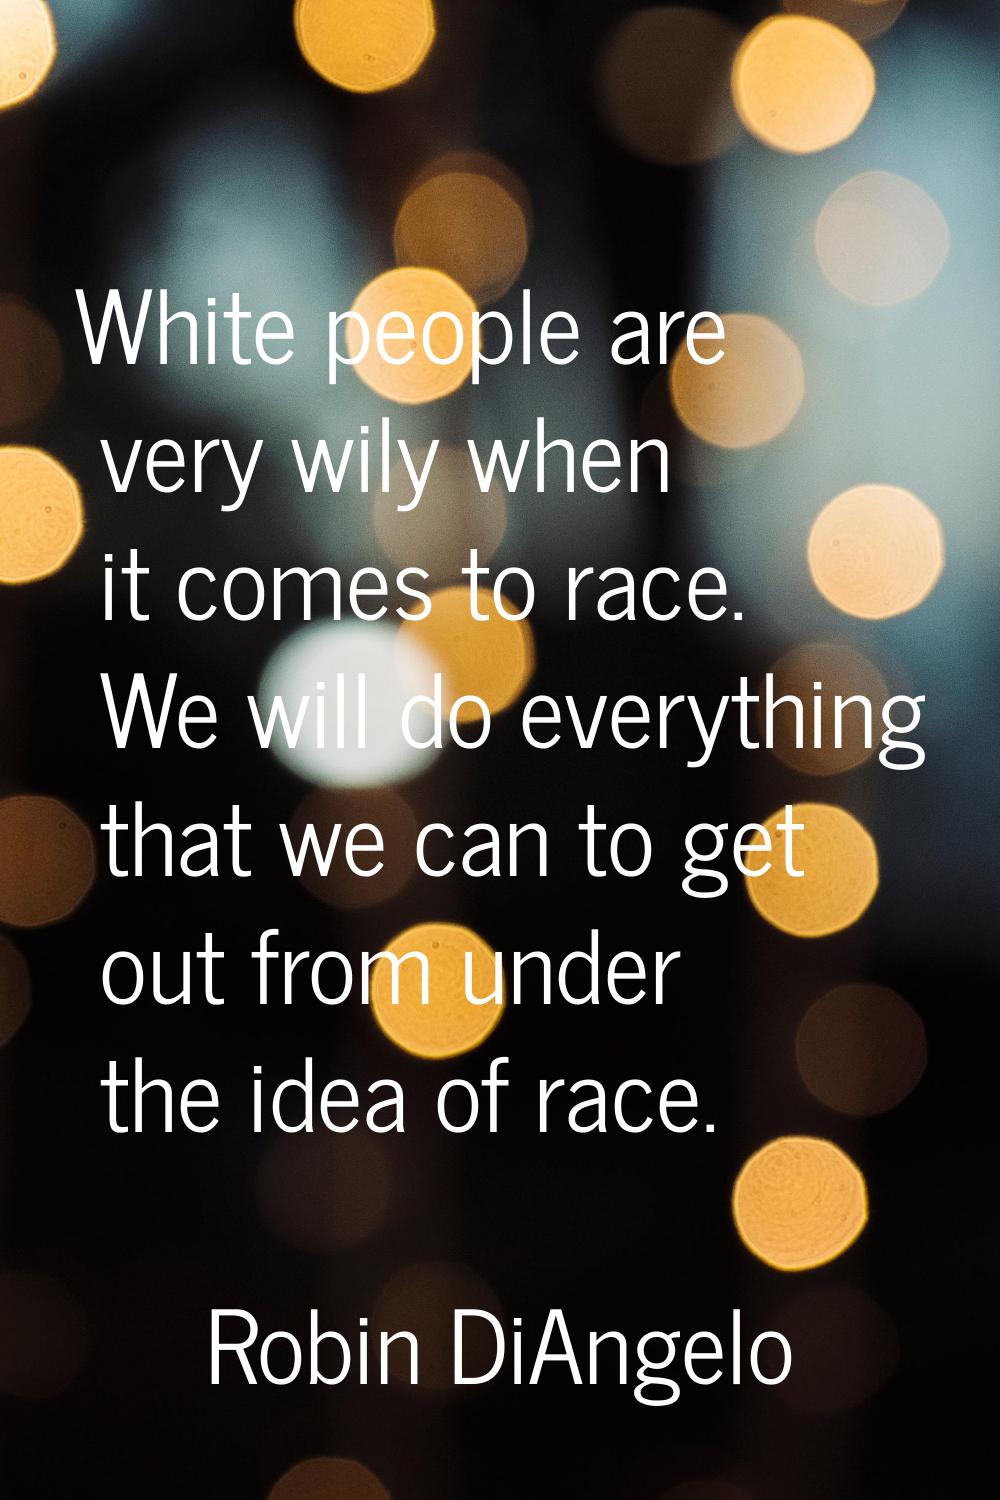 White people are very wily when it comes to race. We will do everything that we can to get out from